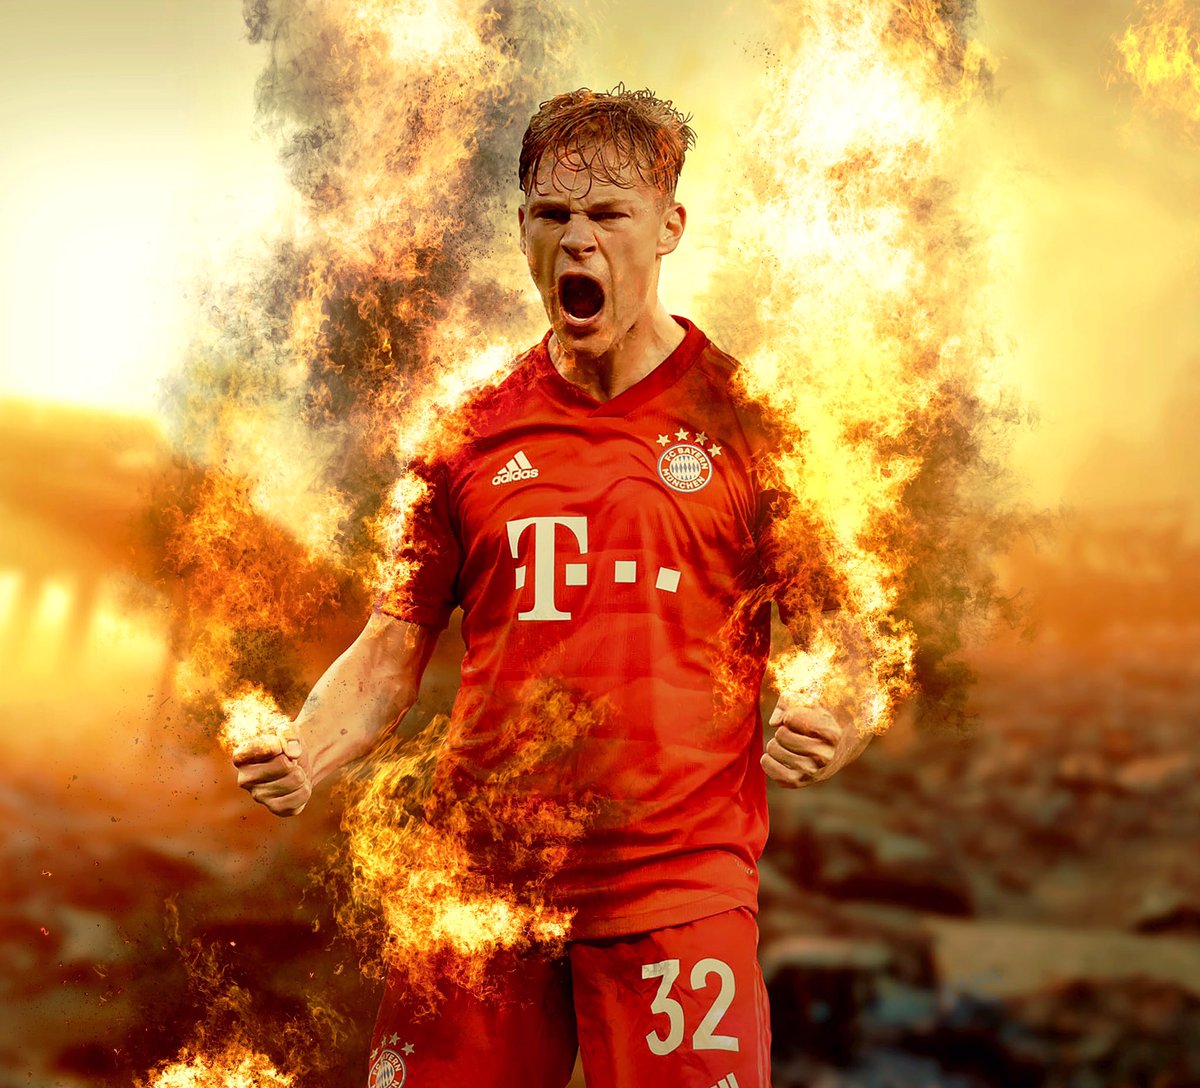 Joshua Kimmich | The mentality monster “Joshua Kimmich is a player that will shape Bayern Munich as a club”-Hansi Flick [APPRECIATION THREAD]